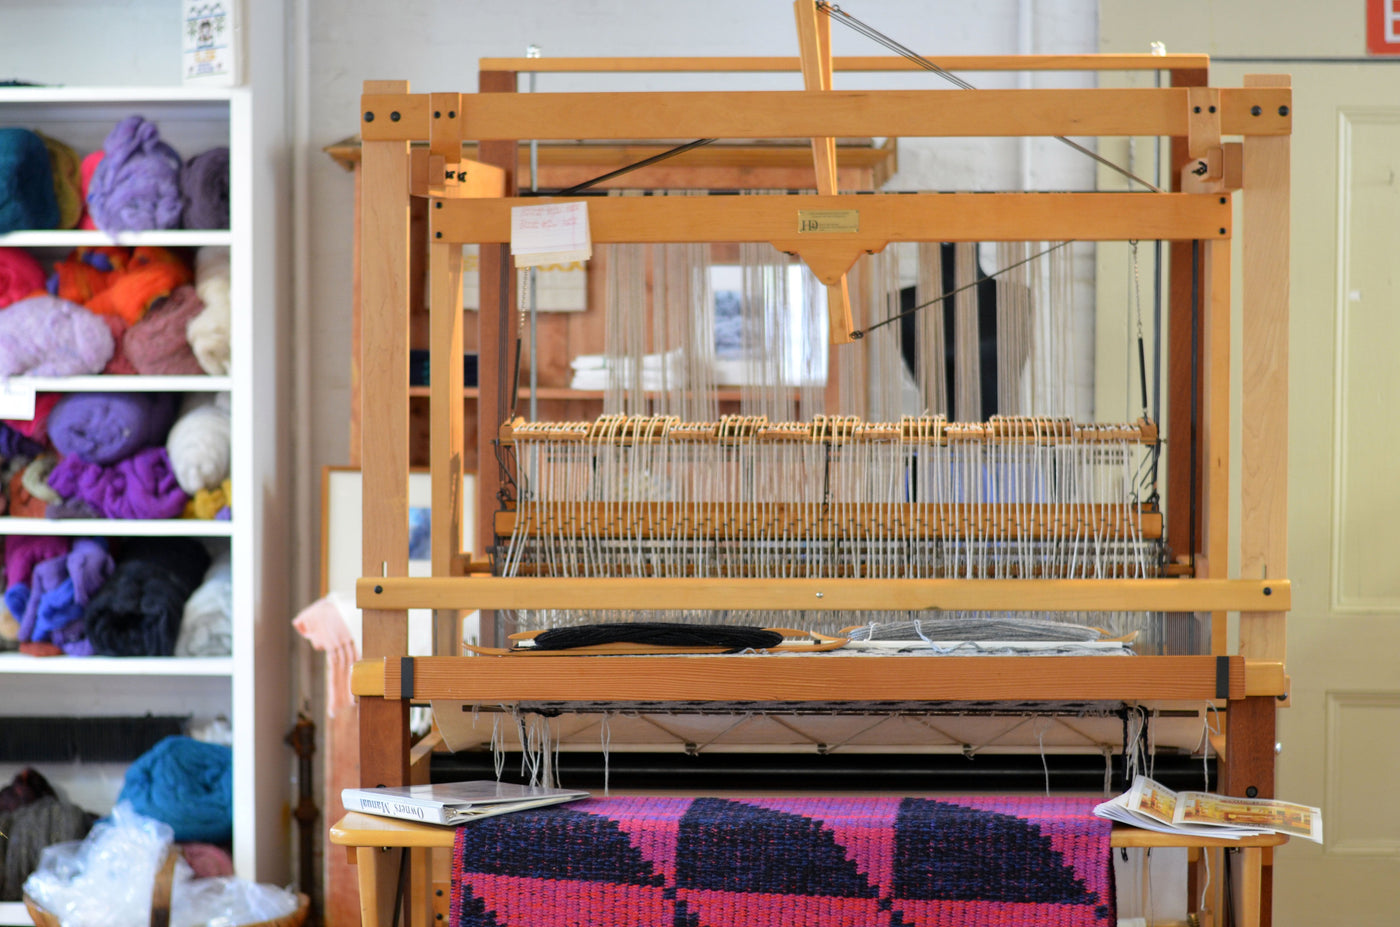 Harrisville Design loom 44”. My mother in law passed. She